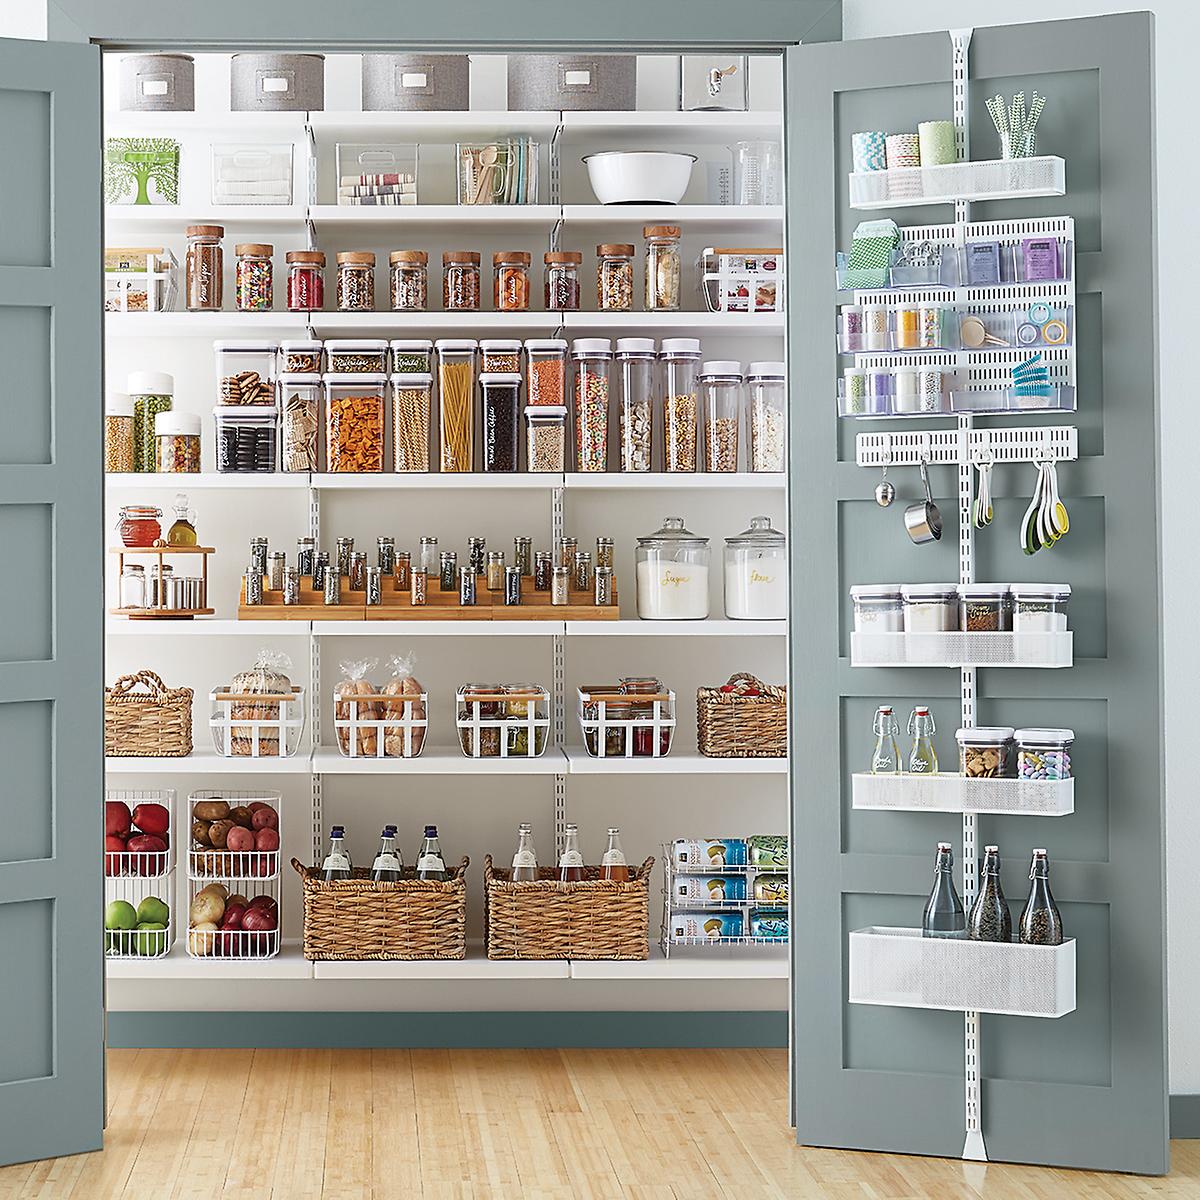 11 Of The Best Kitchen And Pantry Organization Products